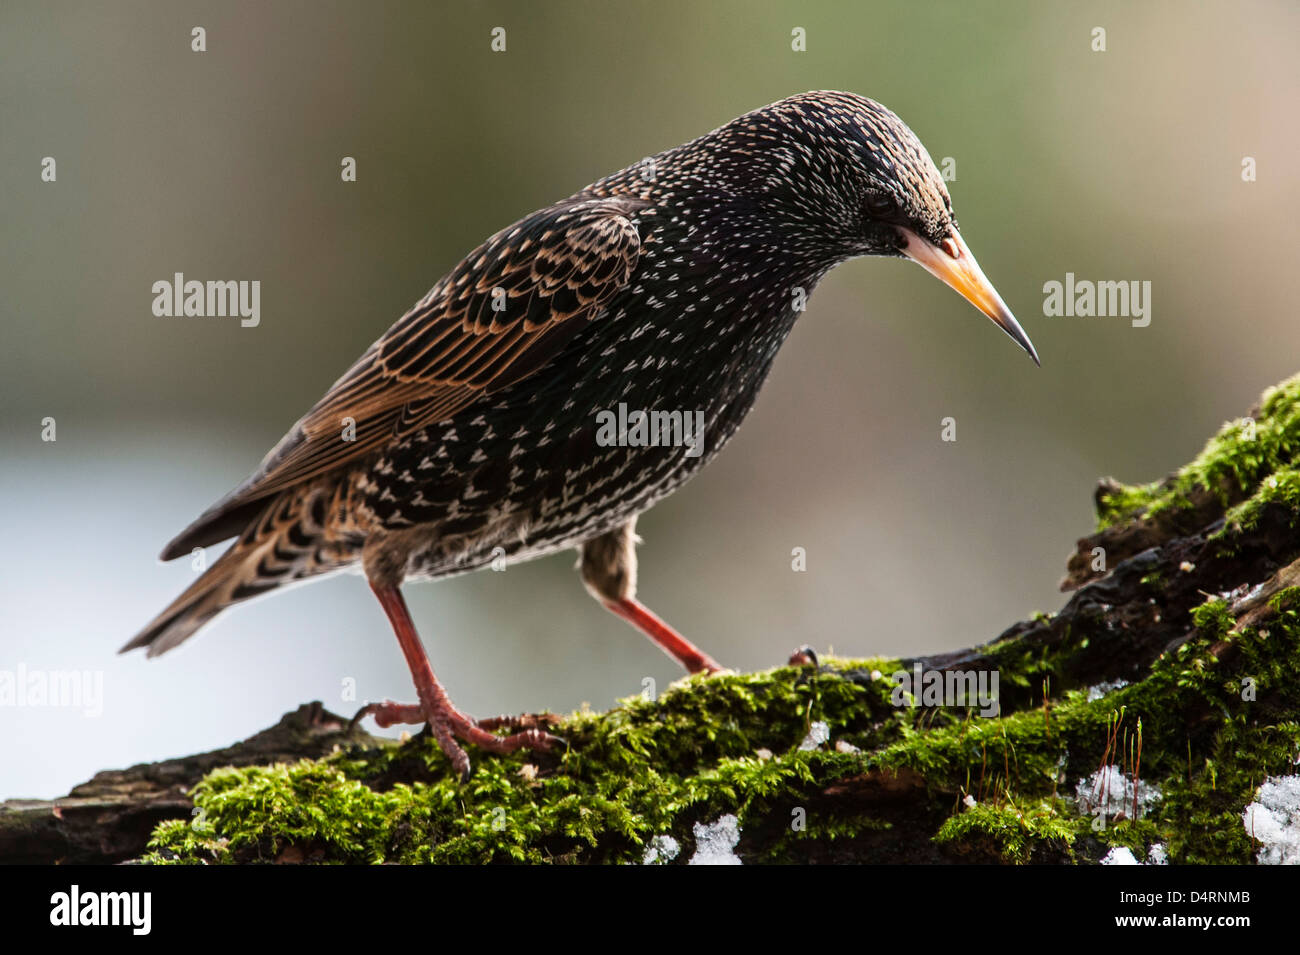 Common Starling / European starling (Sturnus vulgaris) perched on tree stump in early spring Stock Photo